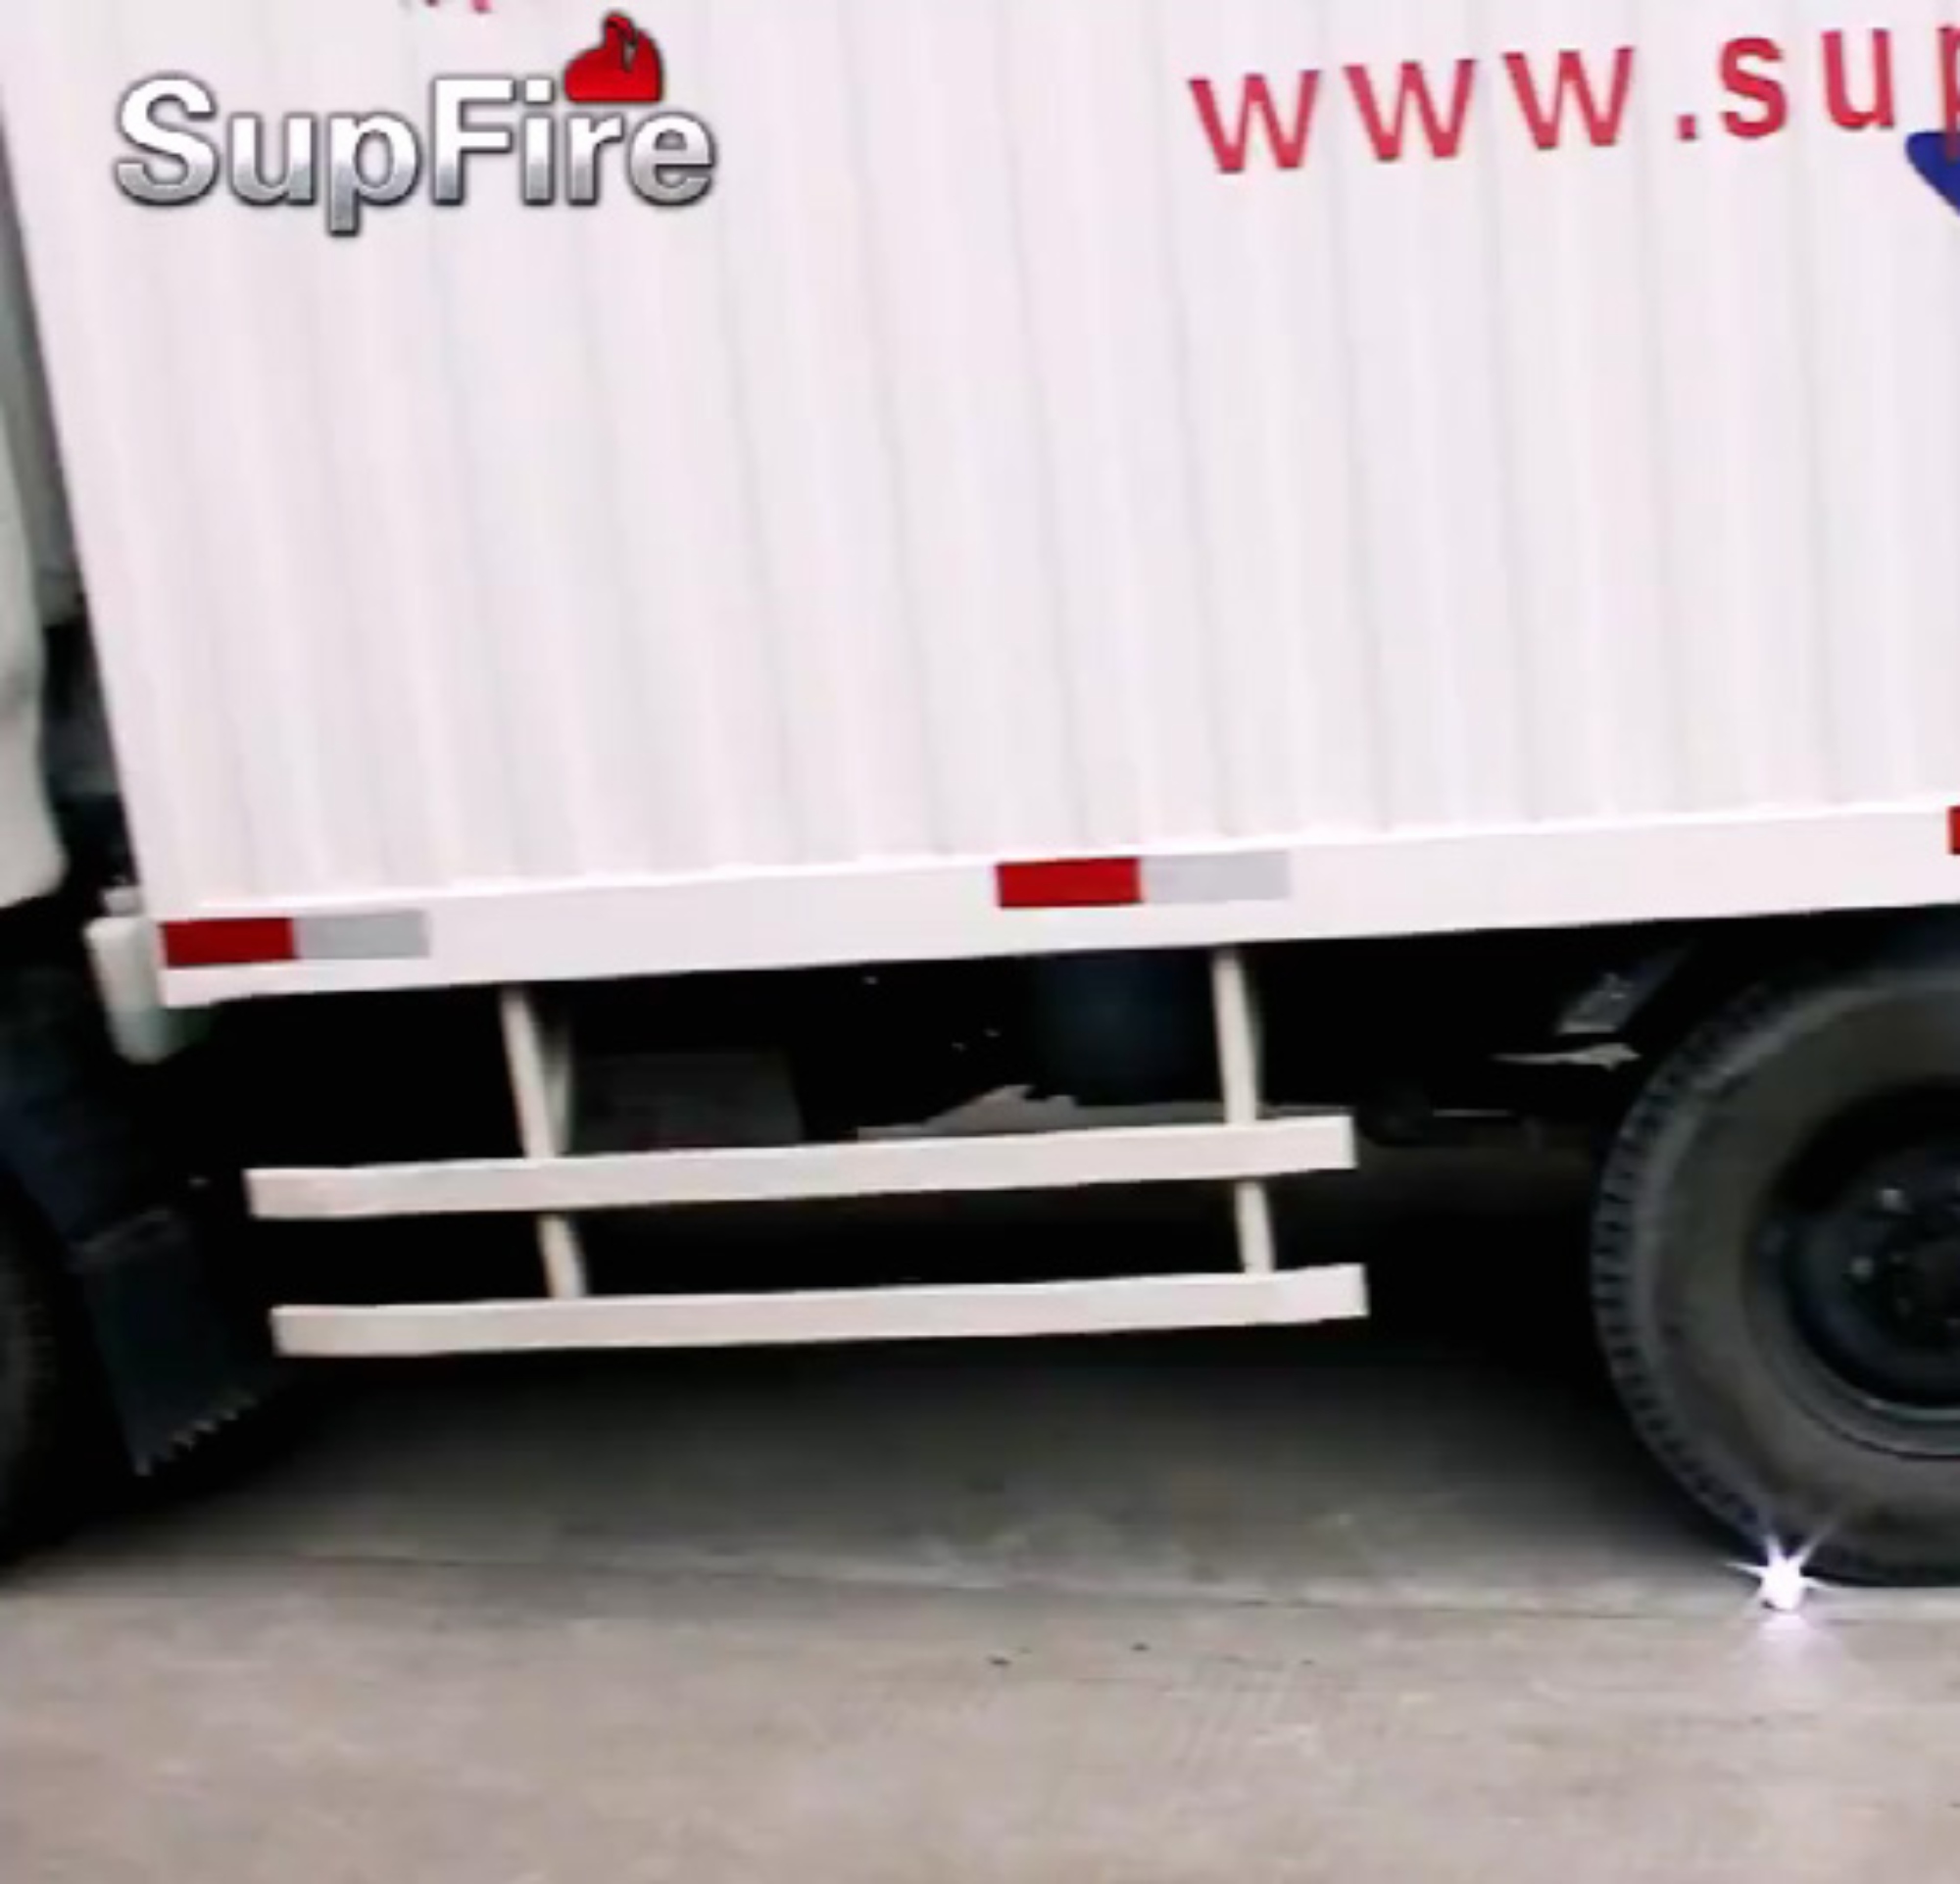 Flashlight Pressure Test: Crazy Crushing by a large Truck!